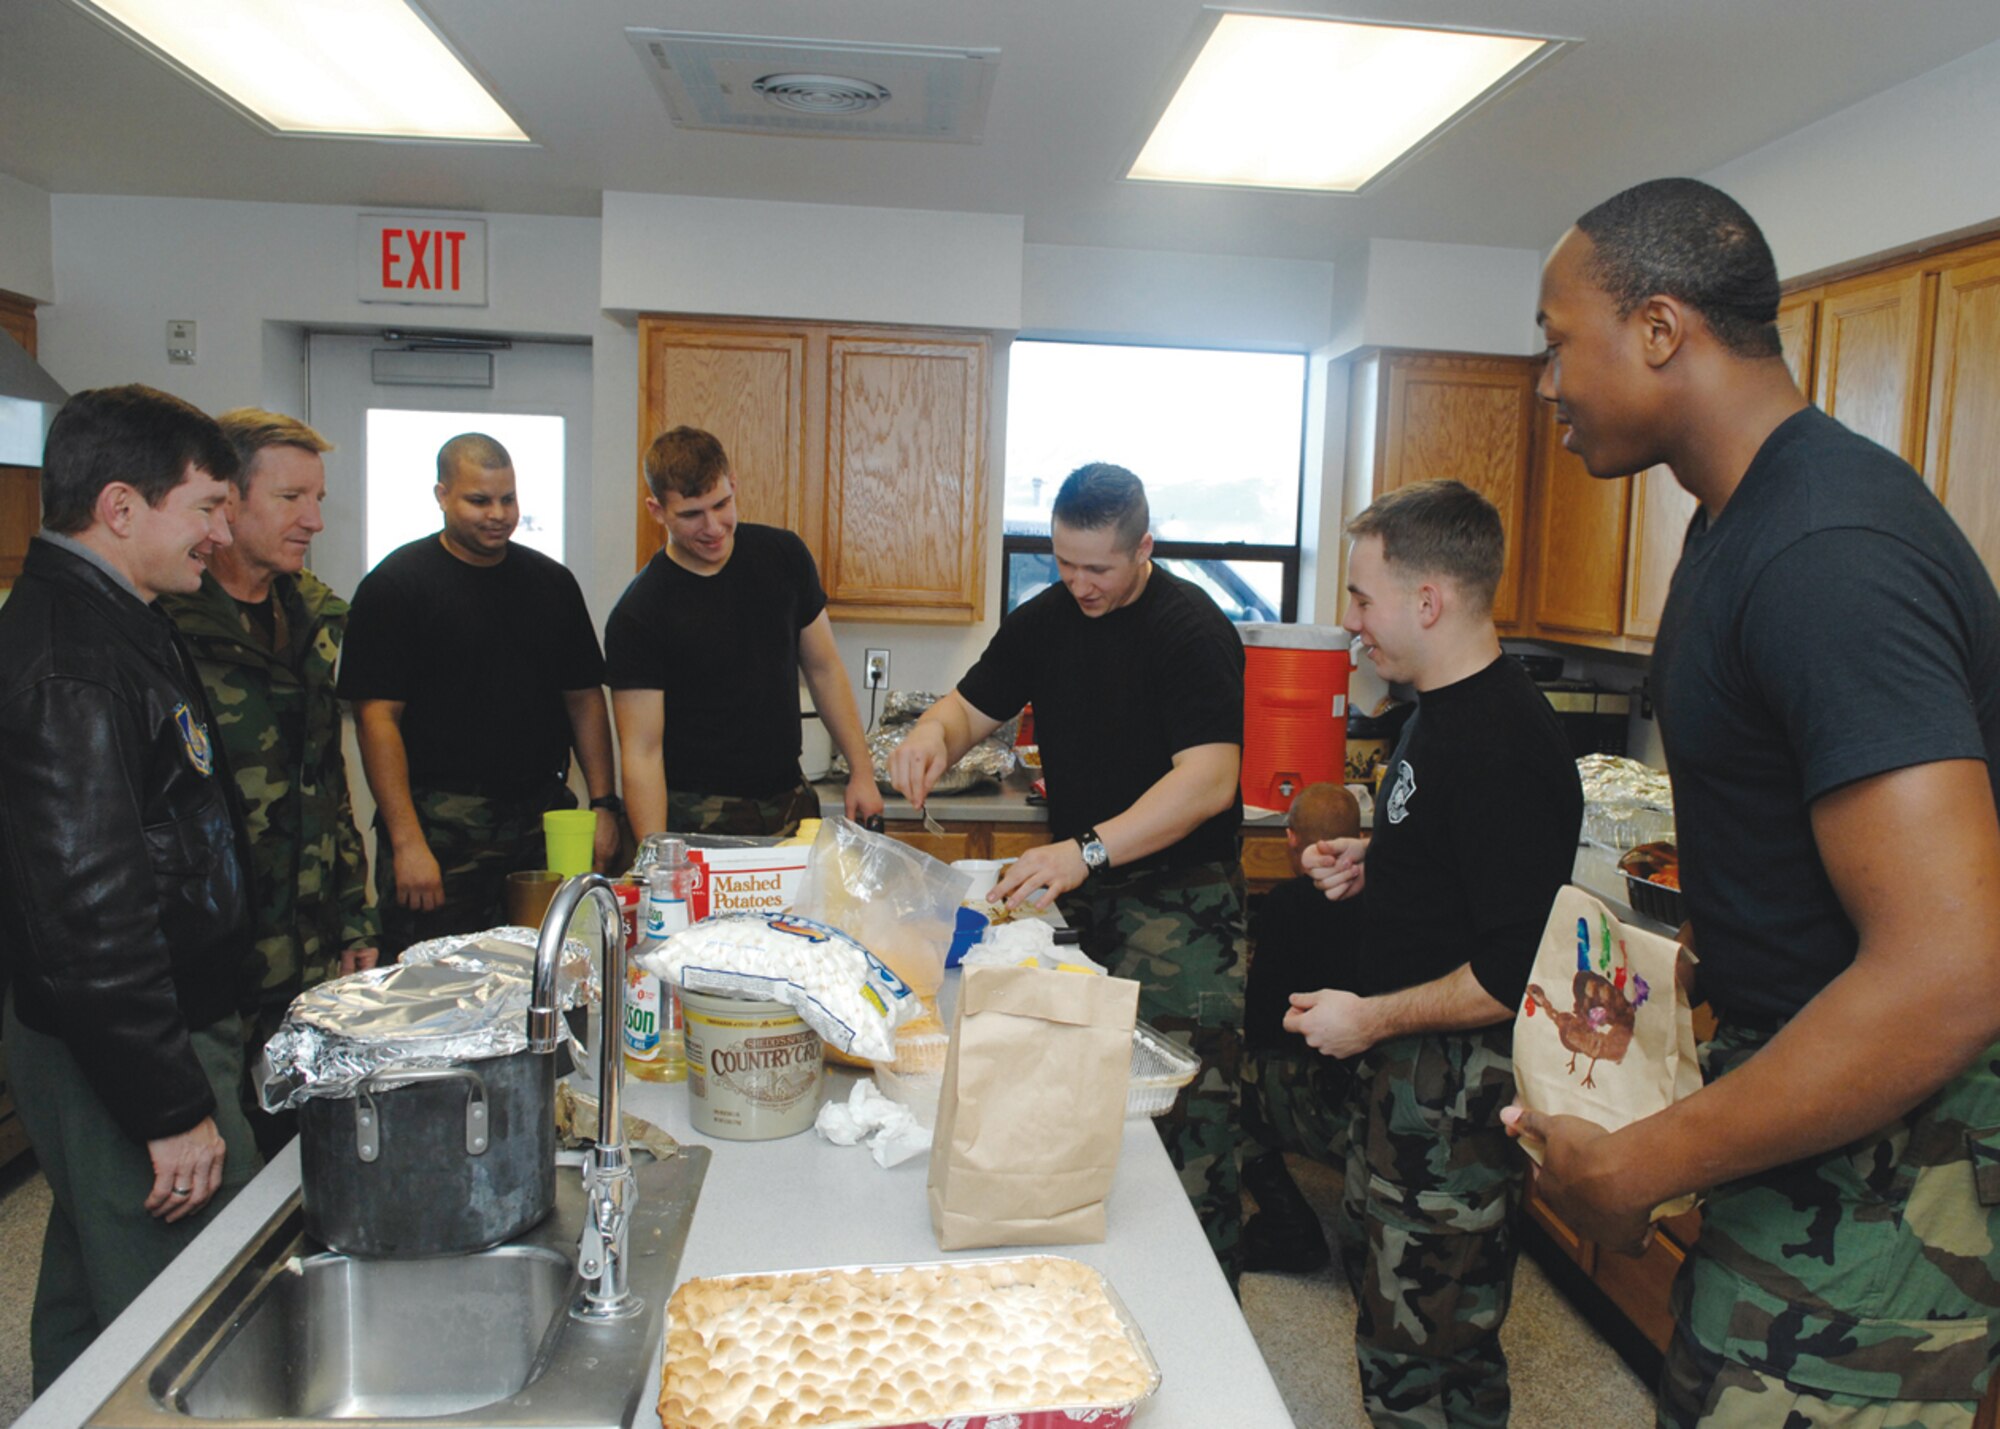 Staff Sgt. James Shultz, 3rd Civil Engineer Squadron, prepares Thanksgiving Dinner for Fire Station #1 as Brig. Gen. Hawk Carlisle, 3rd Wing commander, and Col. Scotty Lewis, 3rd Wing vice commander, stop in to drop off cookies and other goodies on Thanksgiving Day. 
(U.S. Air Force photo by Airman 1st Class Jonathan Steffan)